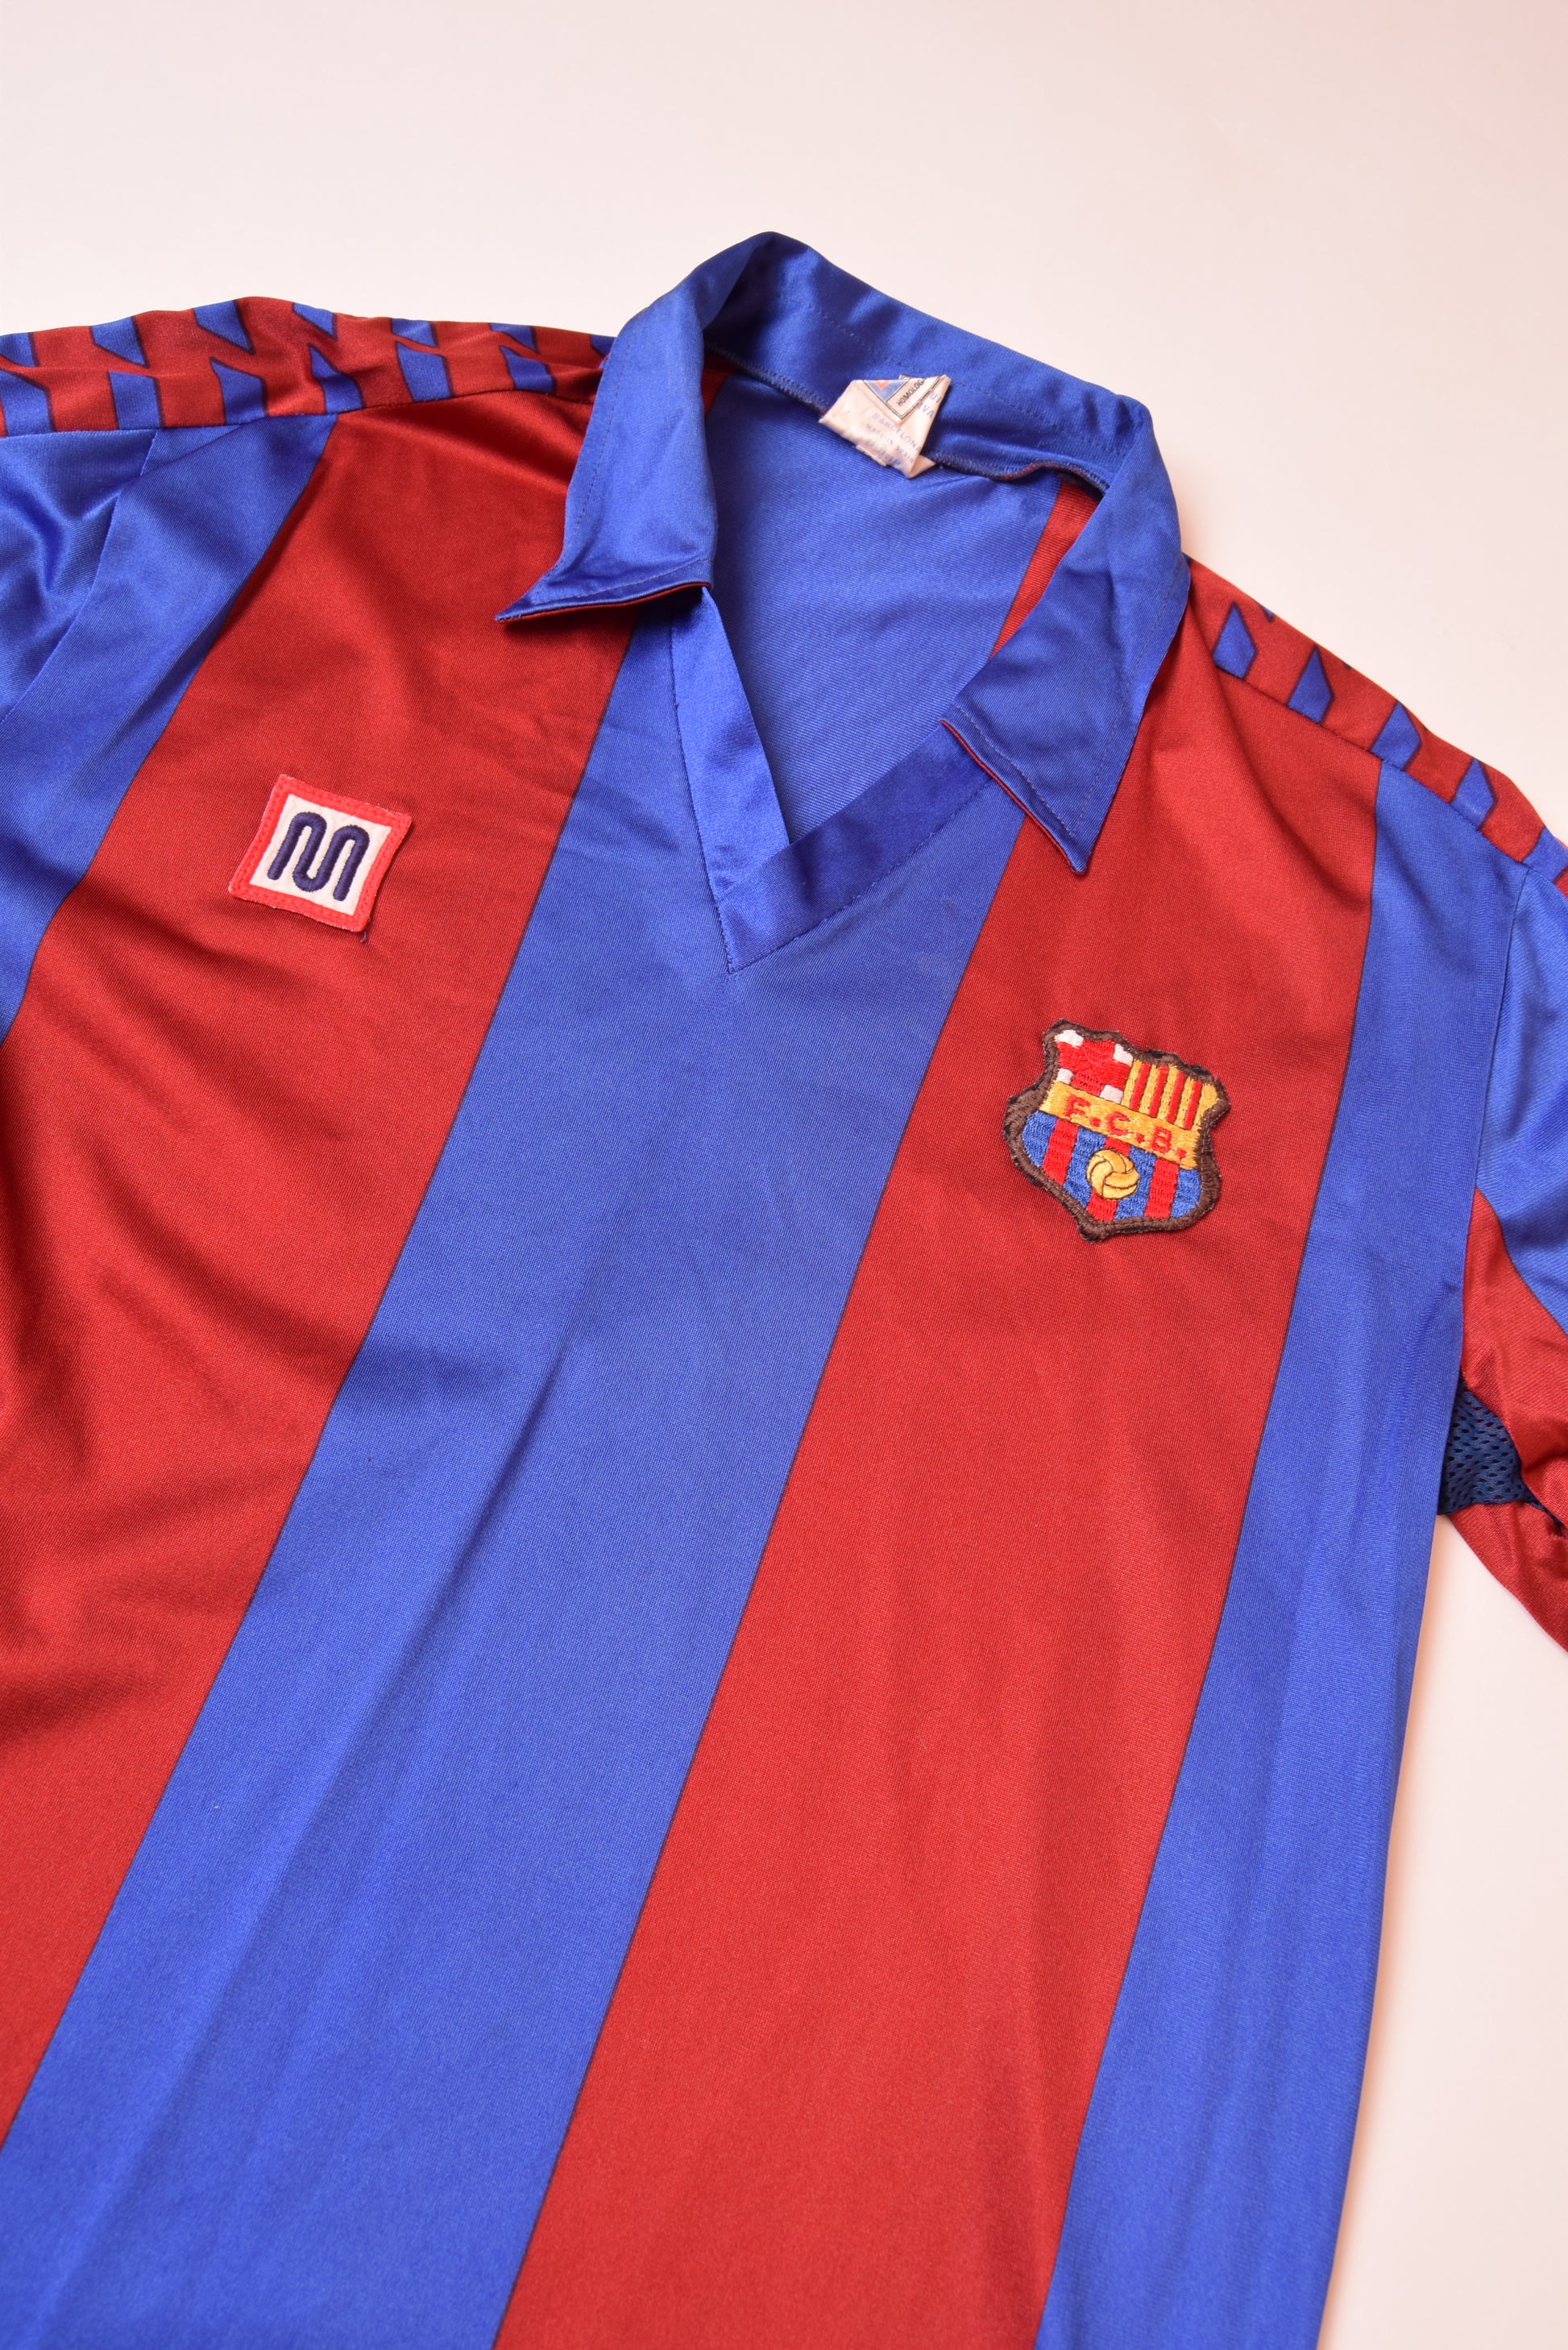 Vintage Meyba FC Barcelona Home Football Shirt / Jersey '84-89 Made in Spain Size S-M